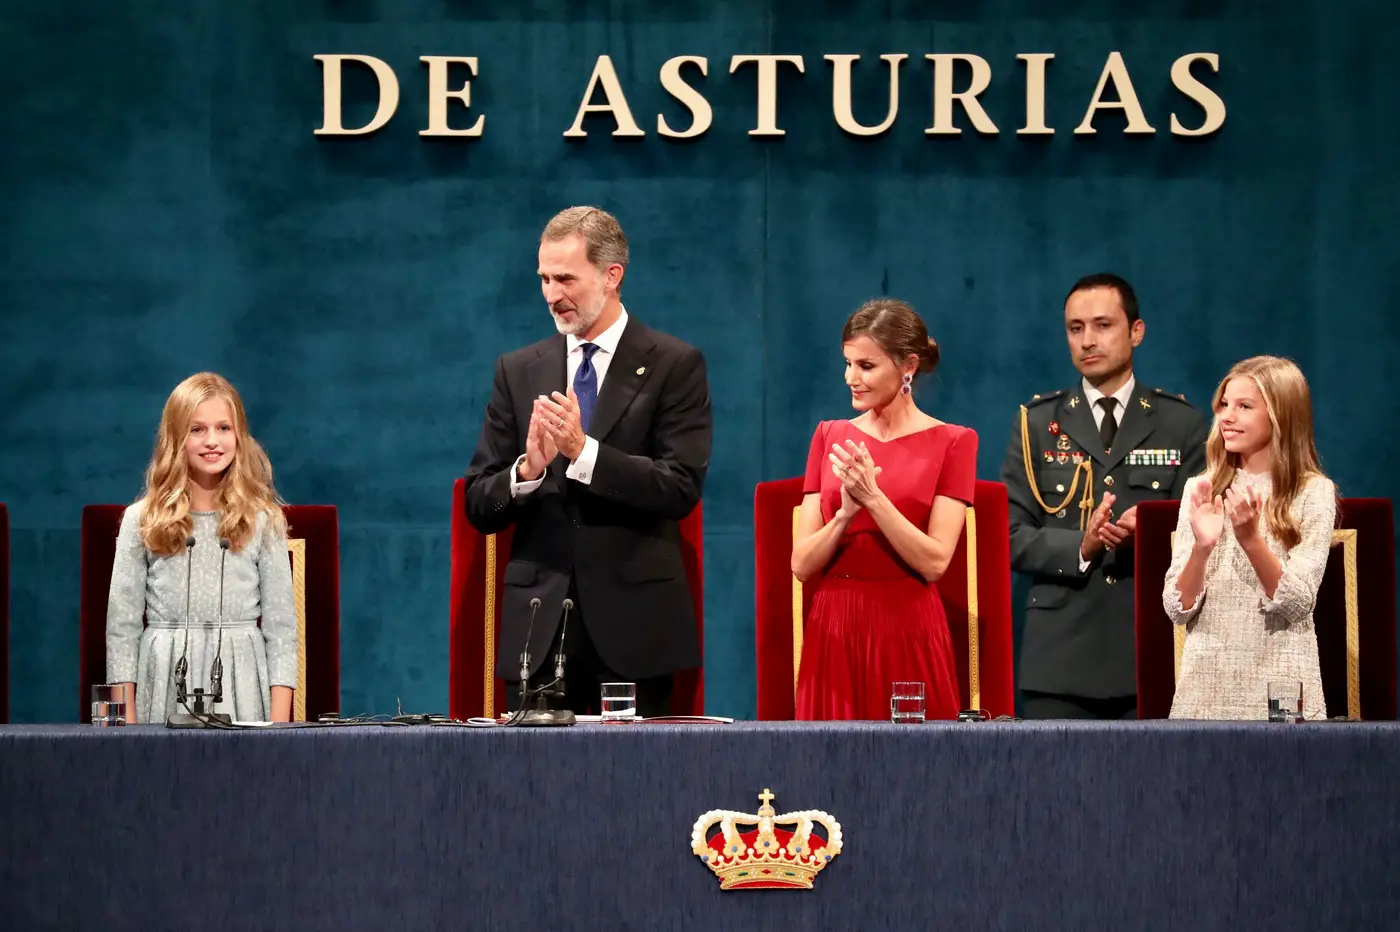 King Felipe and queen Letizia were proud parents when Princess Leonore presented the awards and her first speech